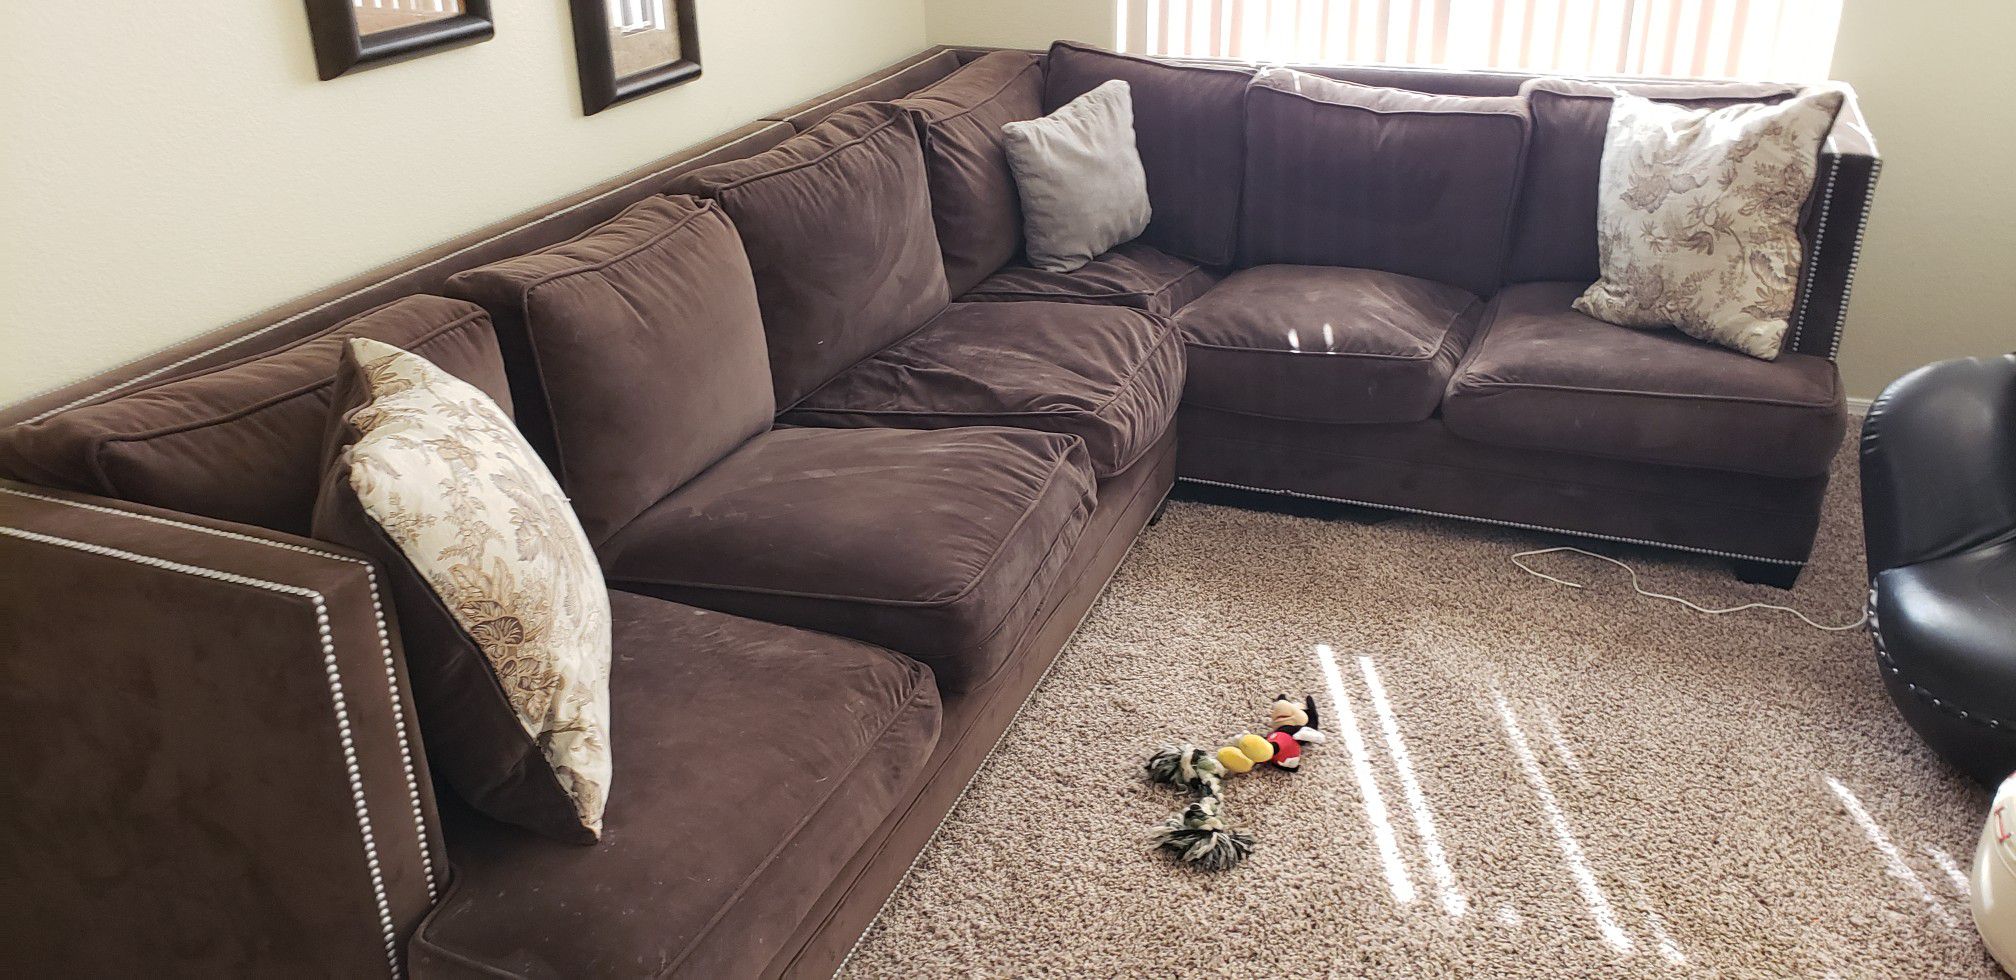 **make offer**Large sectional goose down couch